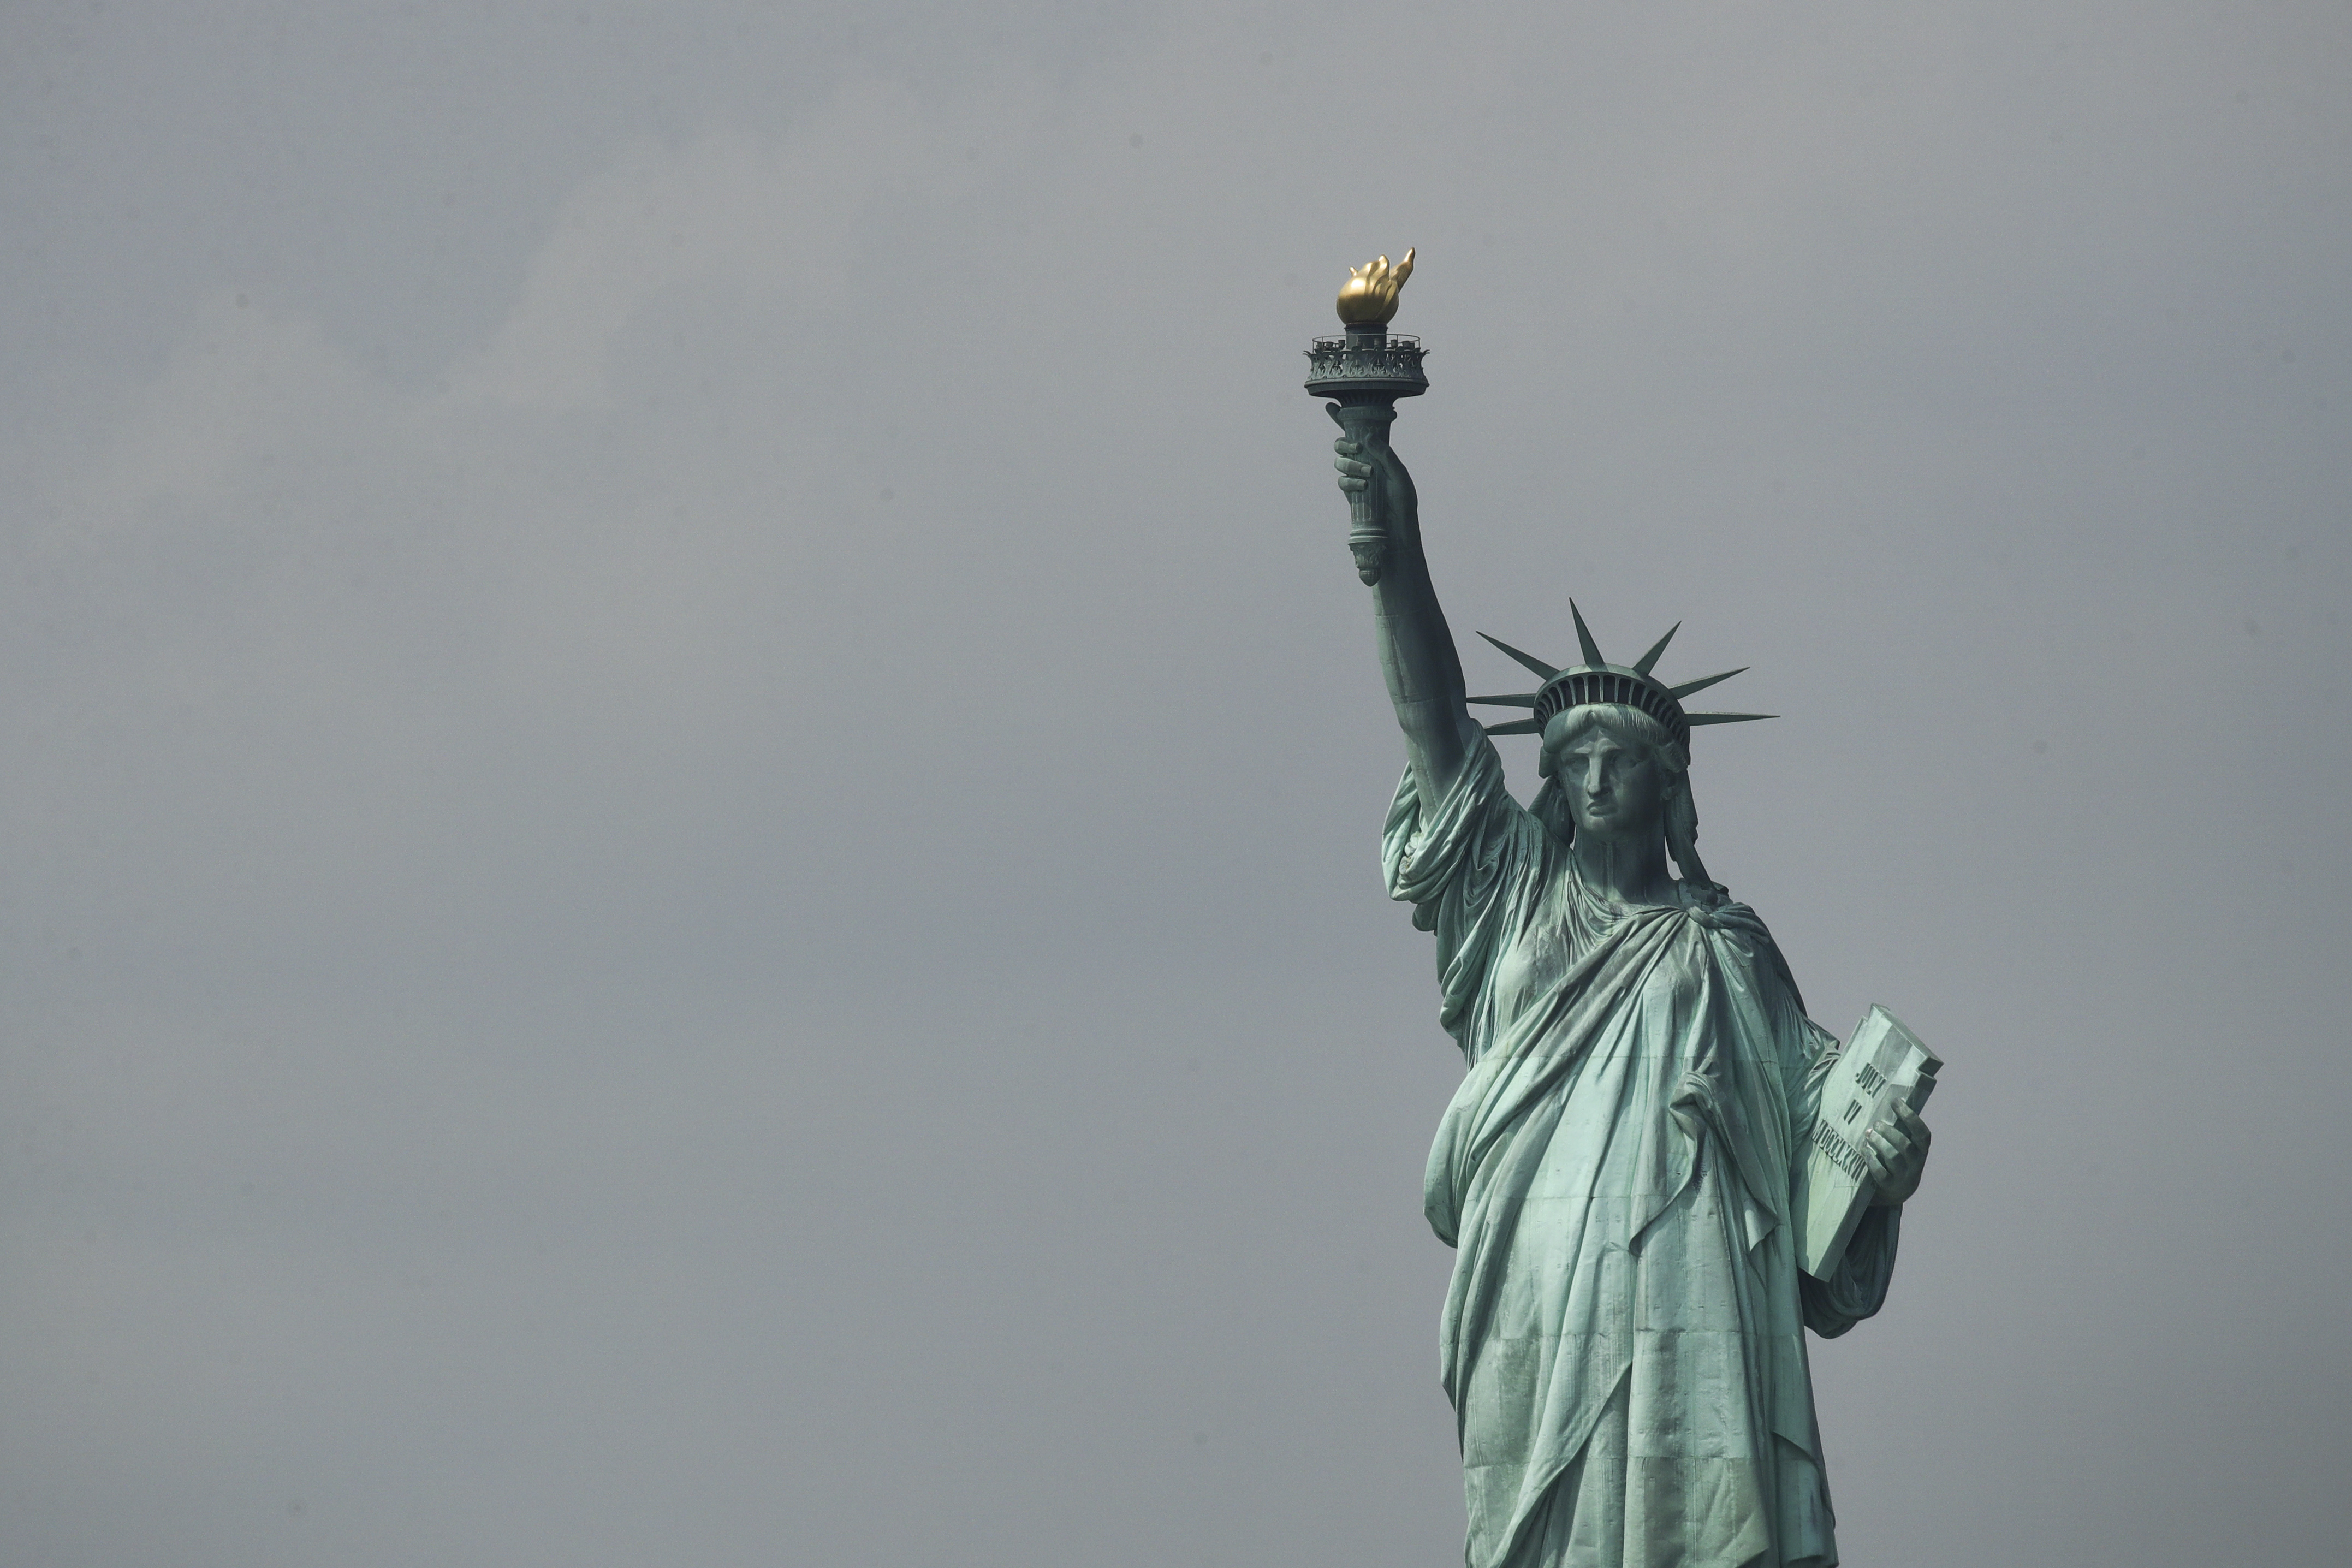 New York’s Liberty Island Evacuated After Fire Breaks Out